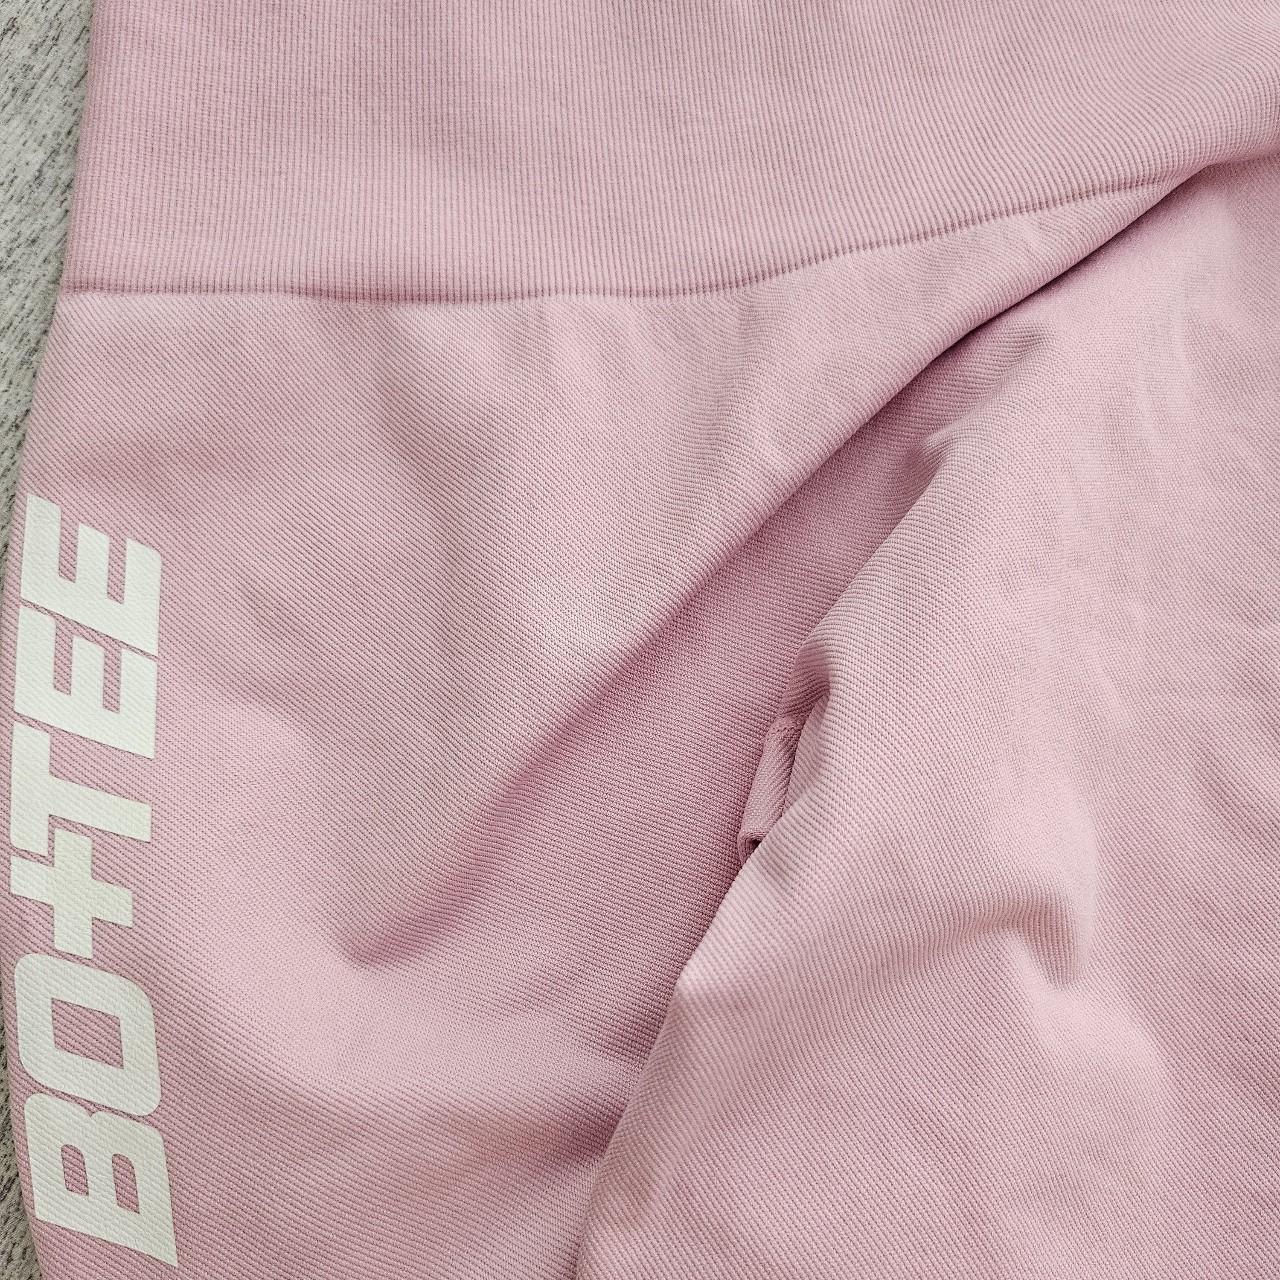 Bo+Tee Set of two pink and purple size petite extra - Depop